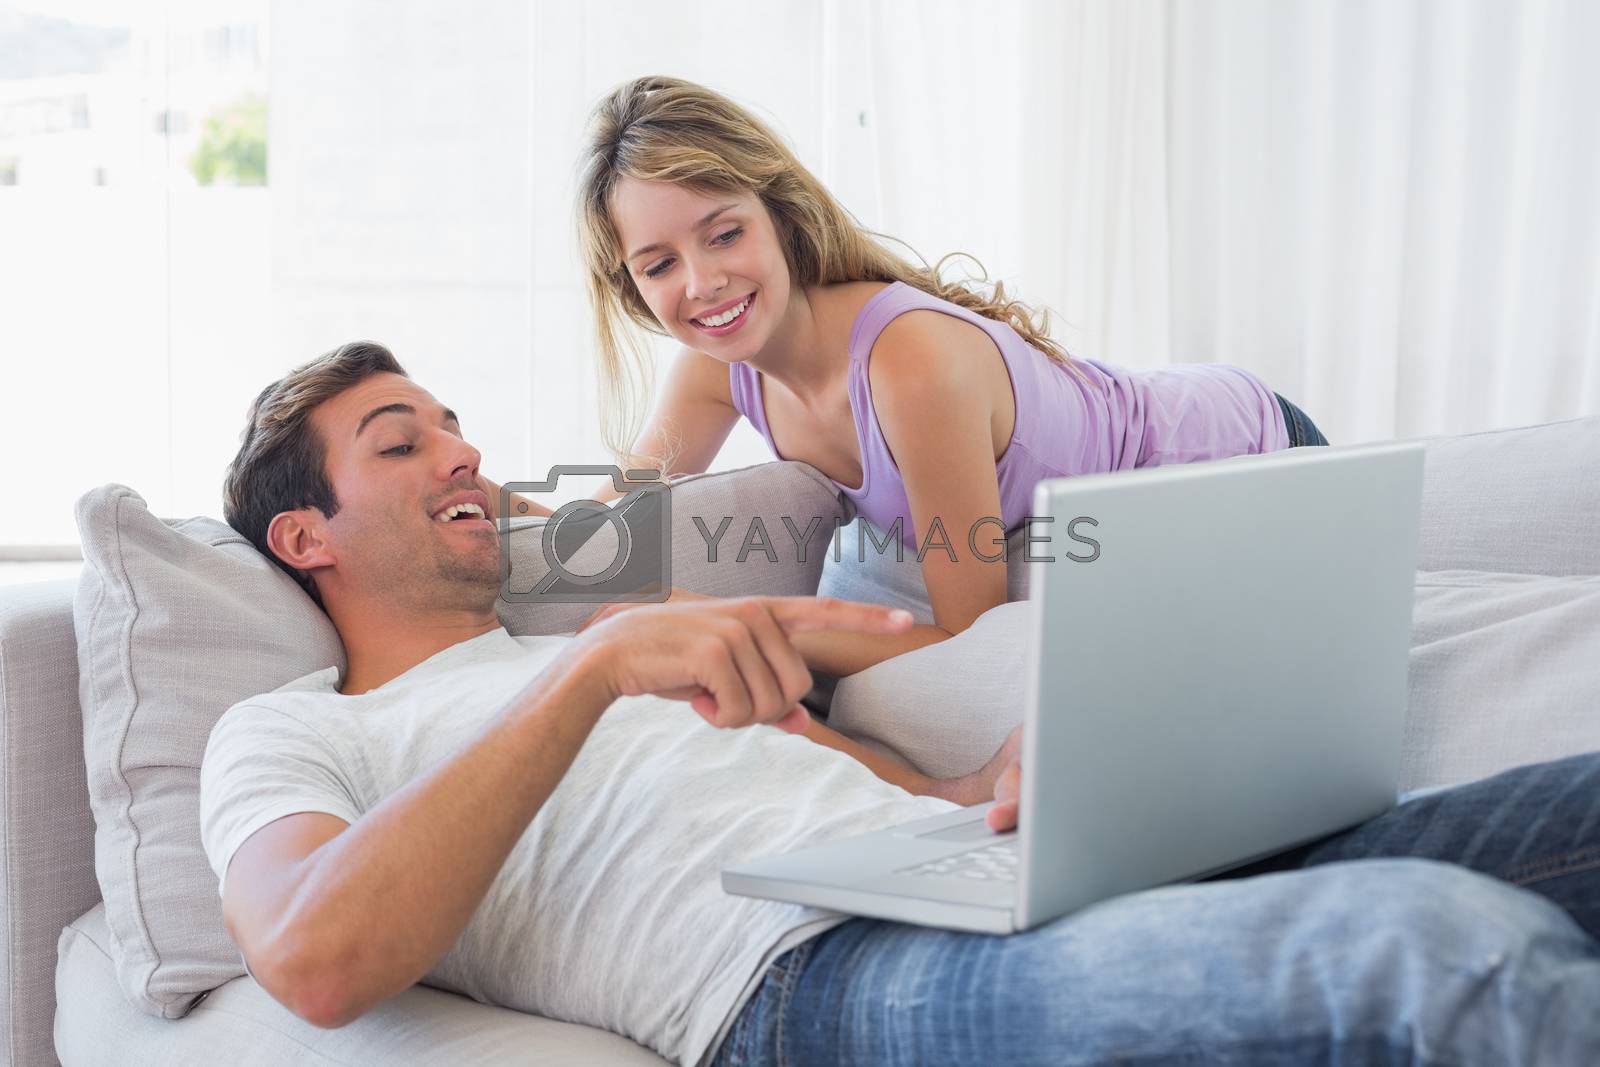 Royalty free image of Relaxed loving couple with laptop on couch by Wavebreakmedia